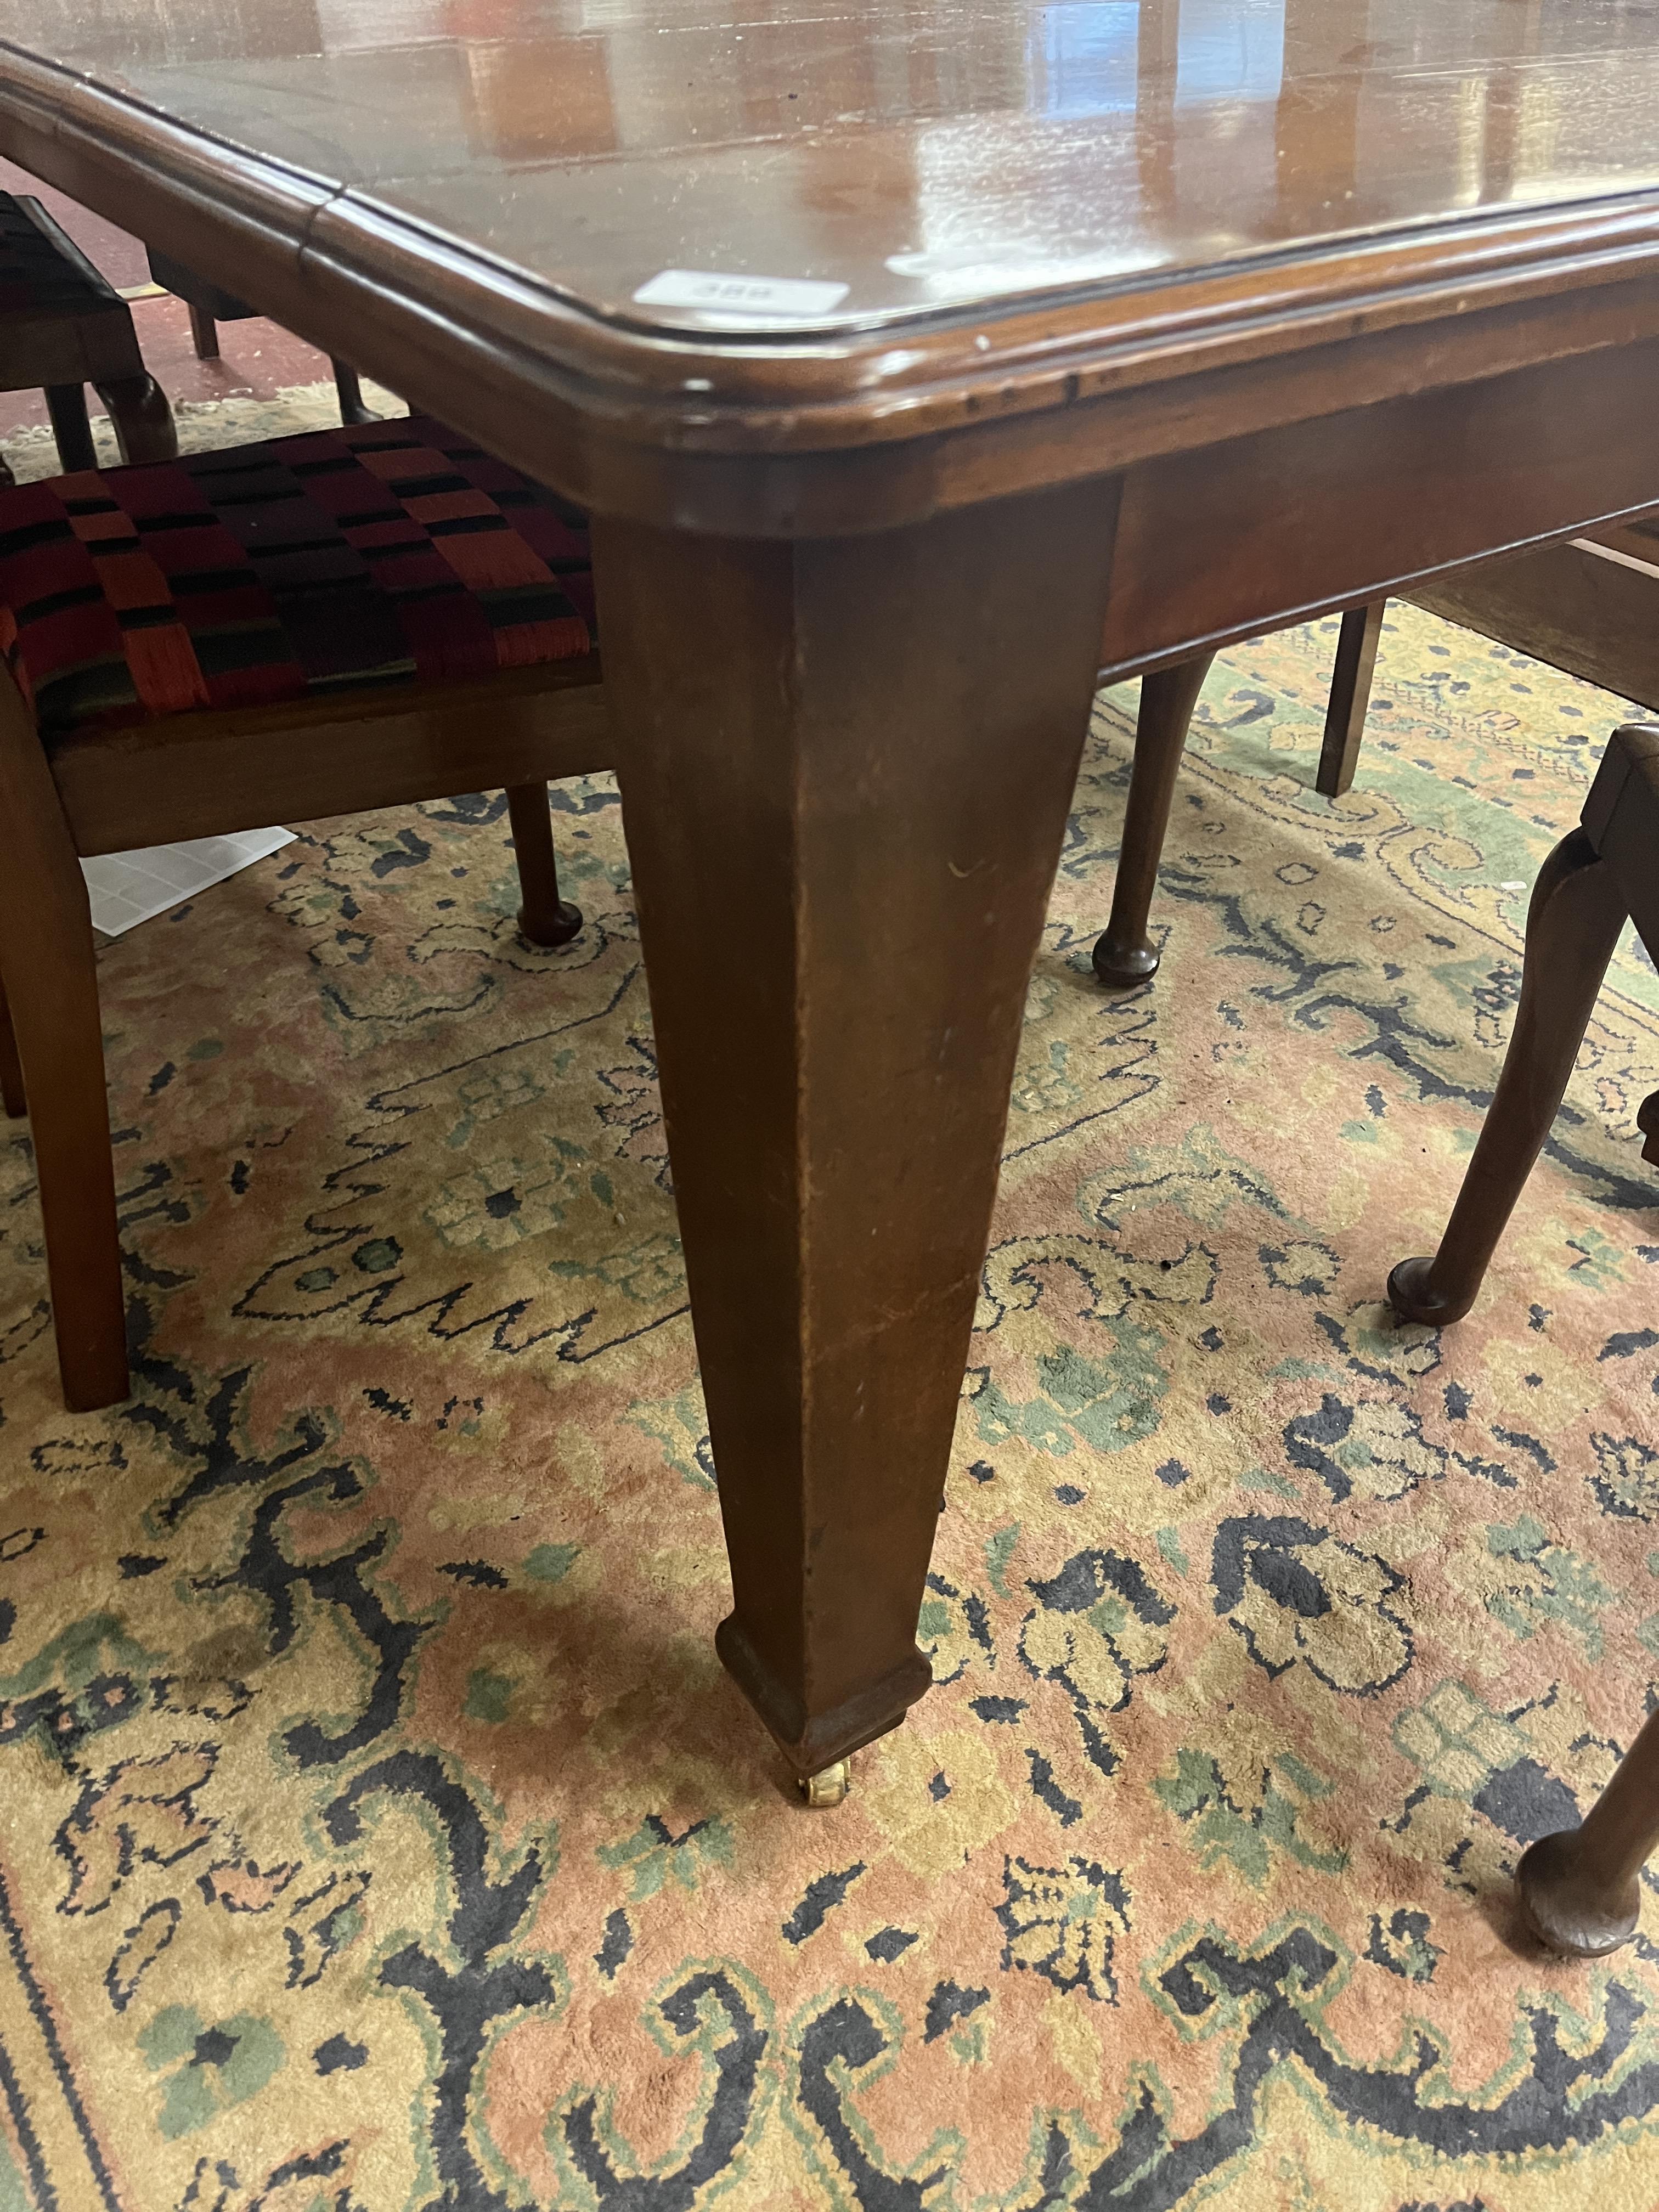 Mahogany wind out dining room table together with 6 chairs and a carver marked Piggott - Approx size - Image 6 of 8